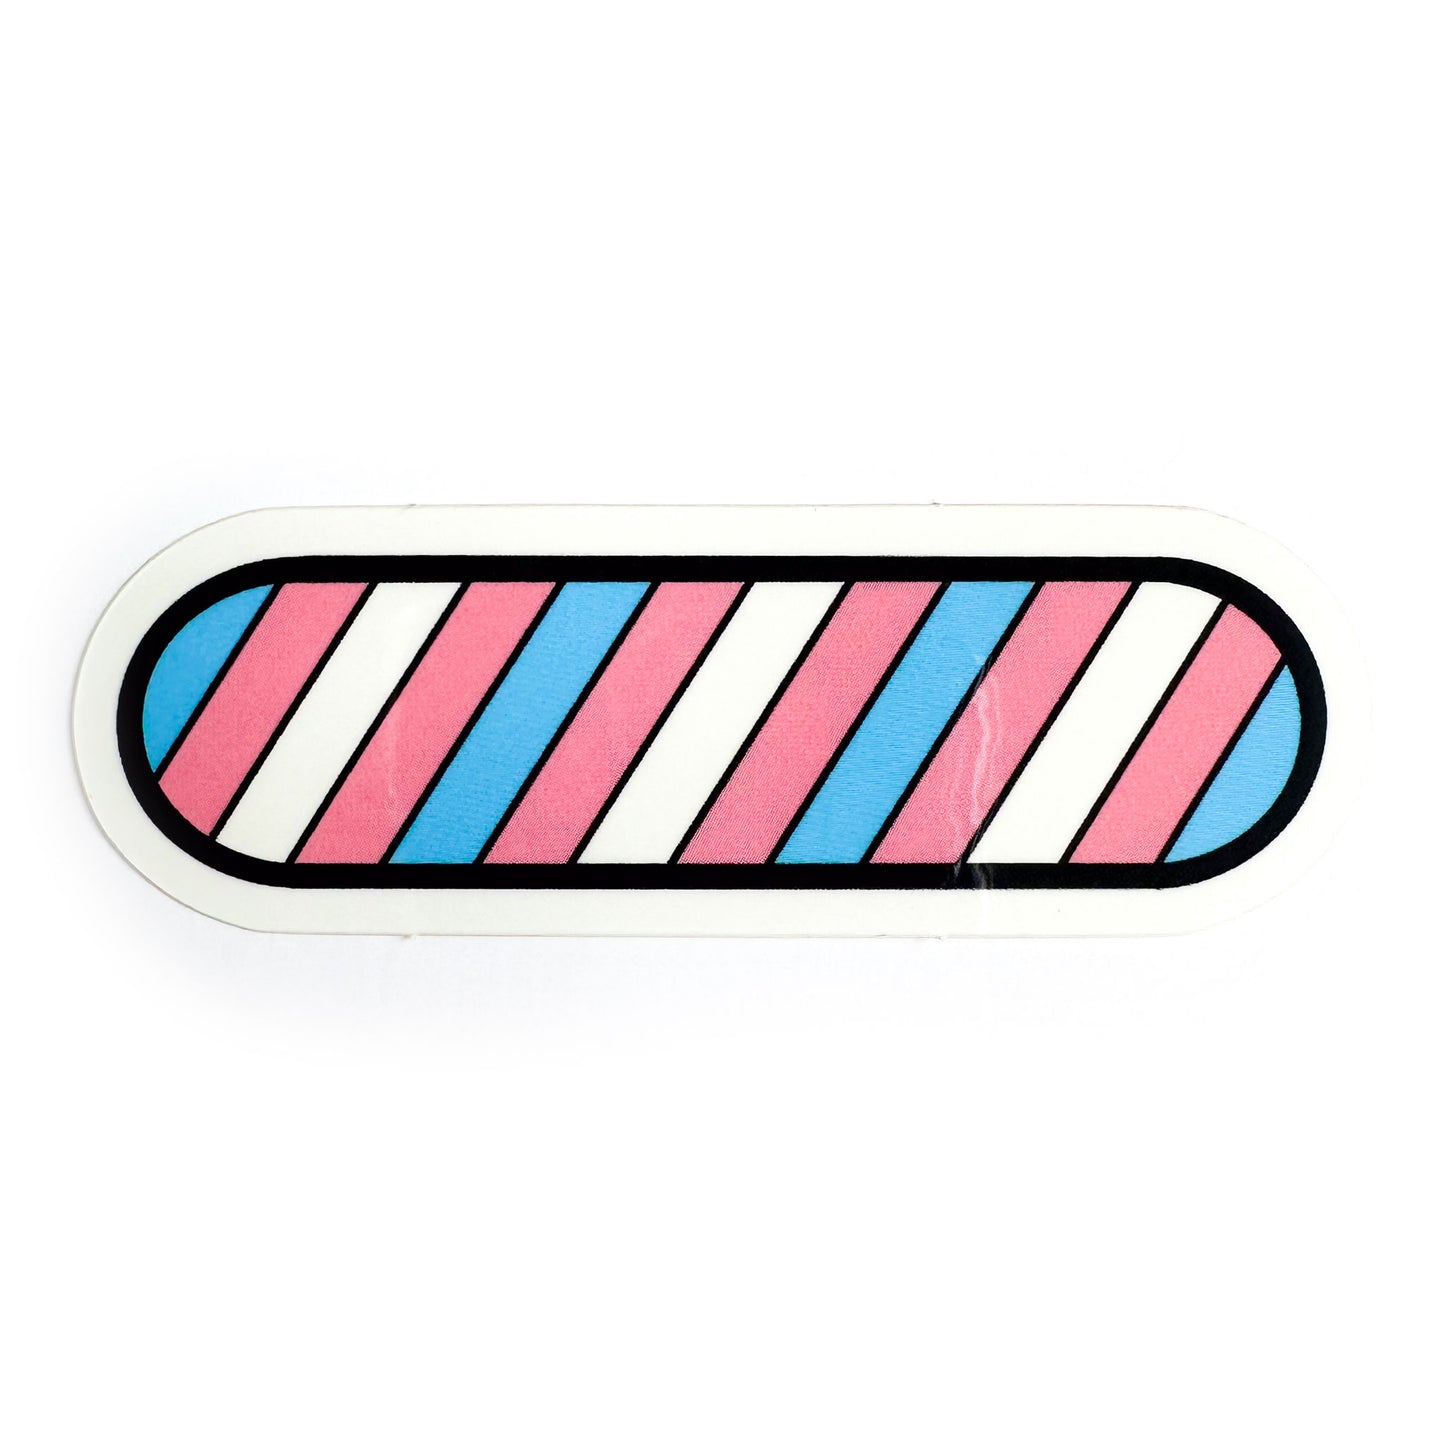 A capsule shaped sticker with the colors of the Transgender Pride flag in diagonal stripes, blue, pink, and white. 